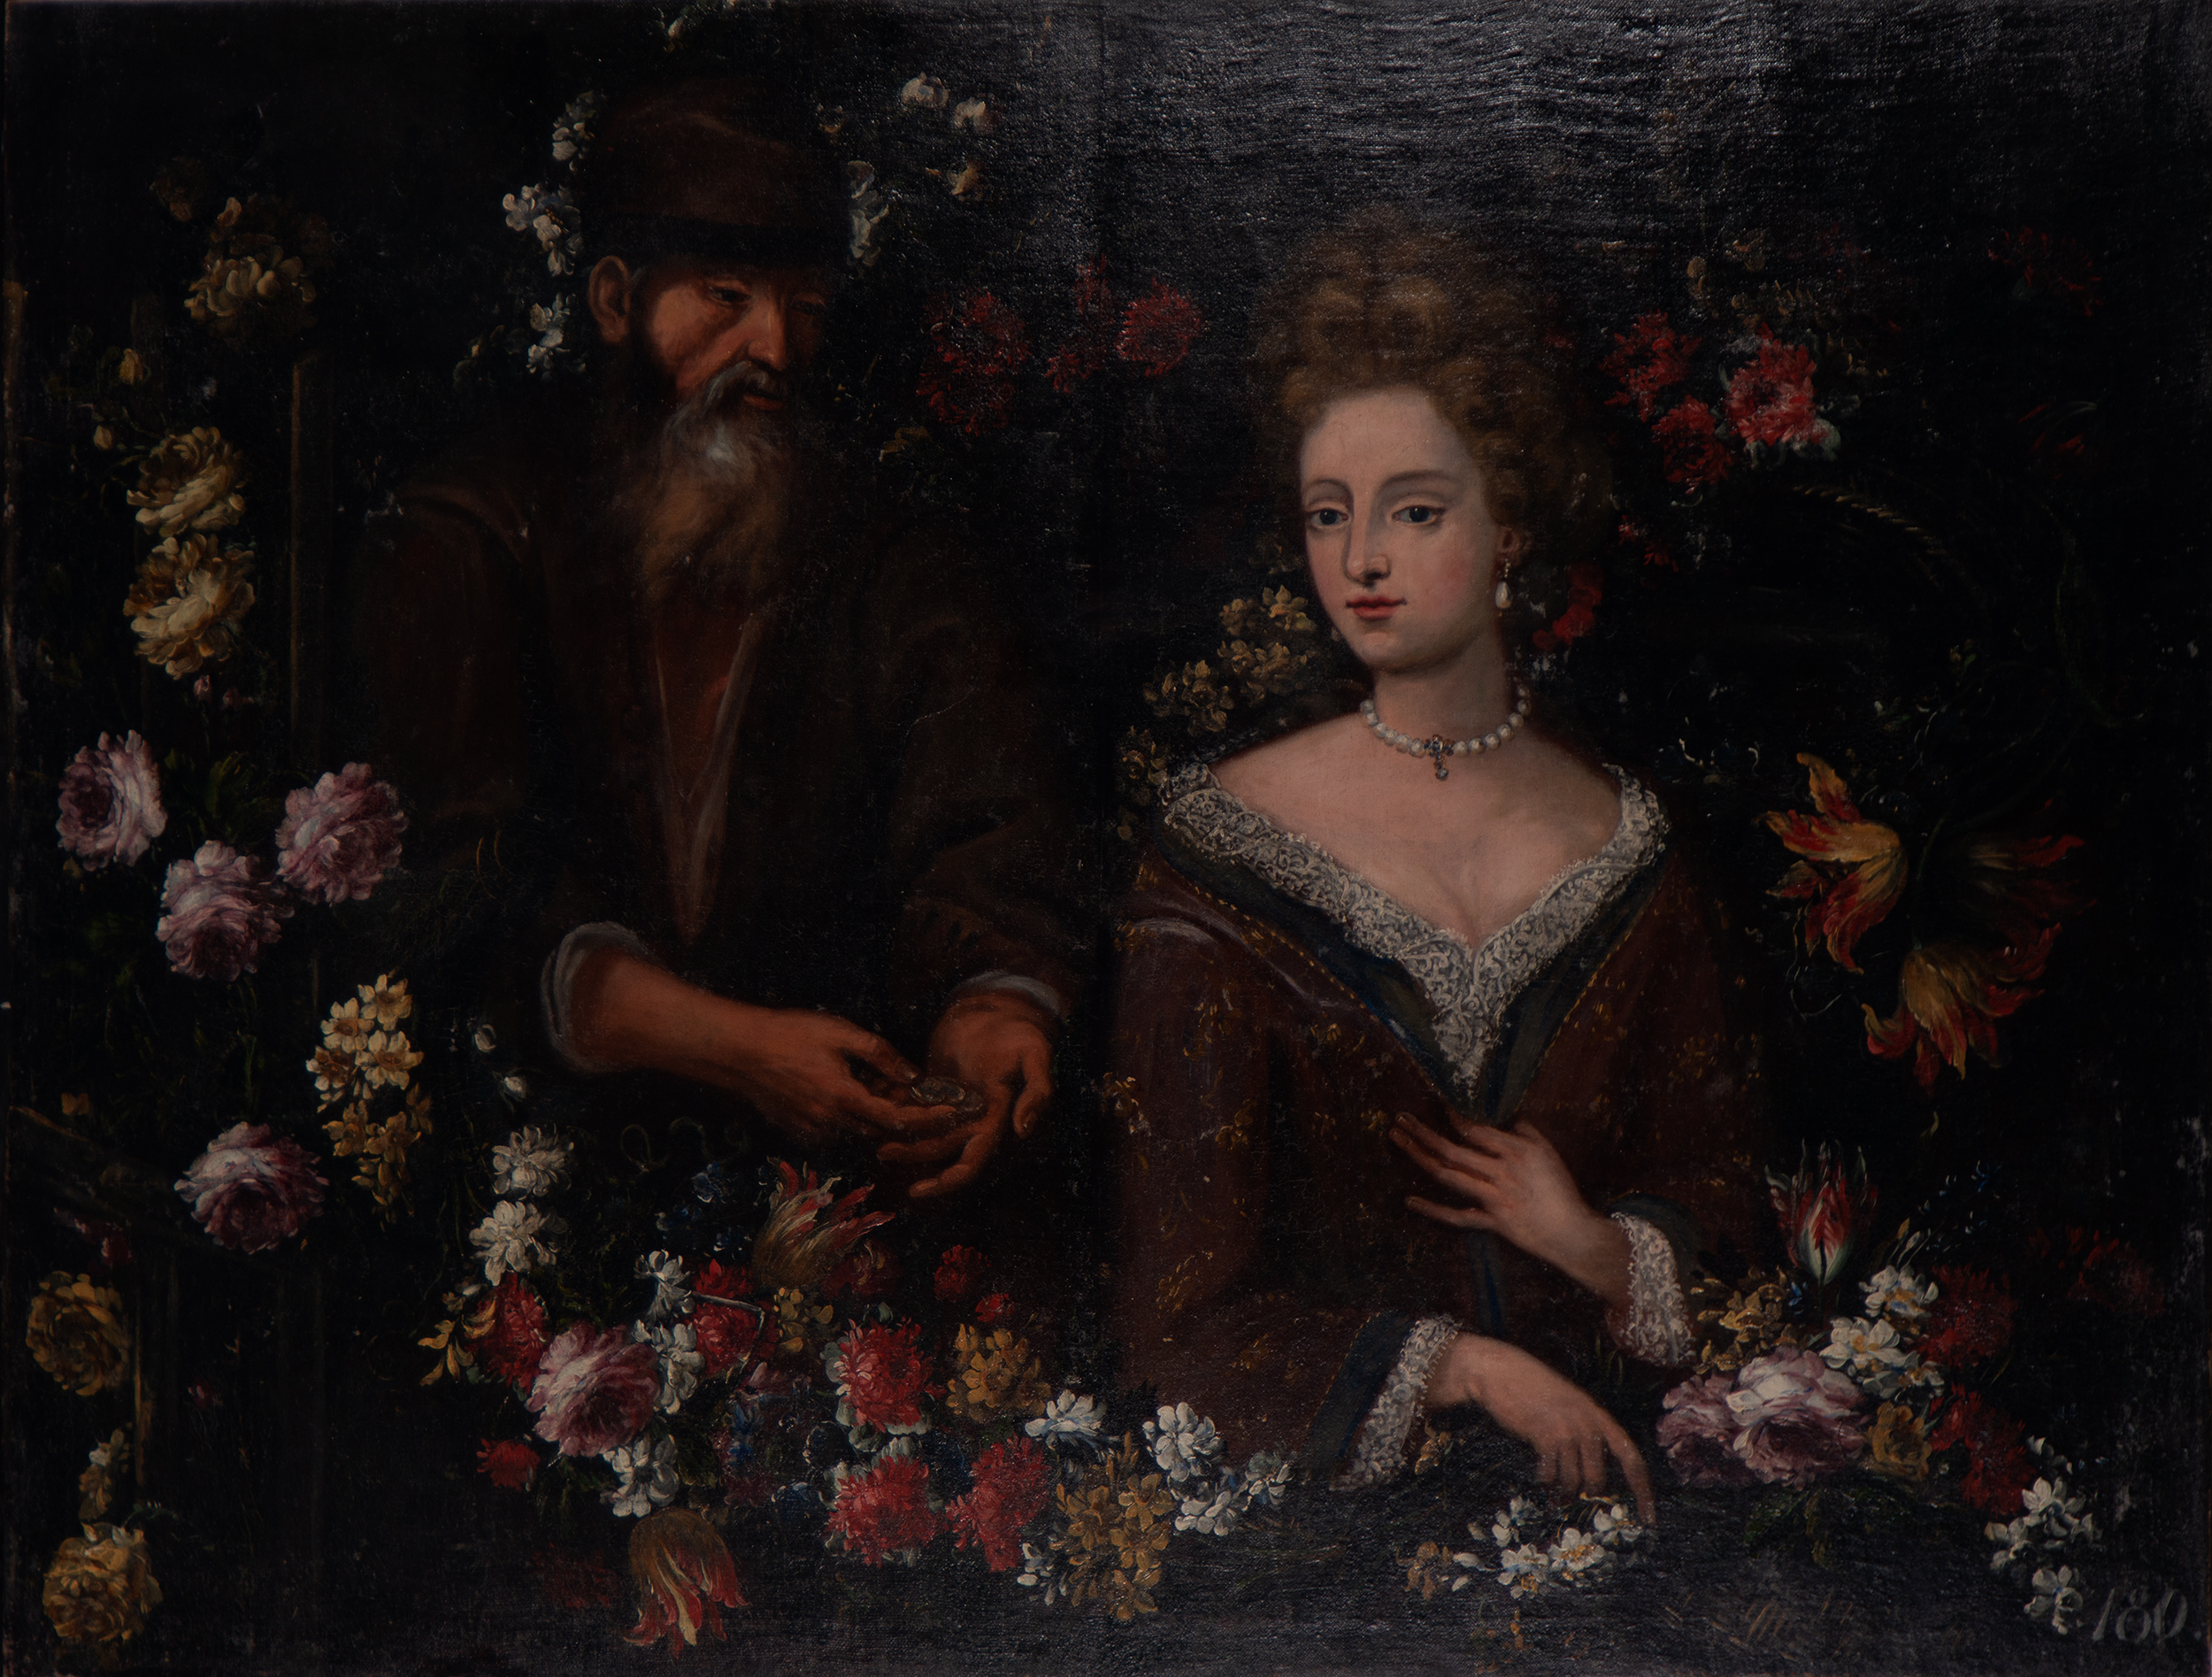 Large Flower Garland, with a lady and a beggar, Flemish school of the 17th century - Image 3 of 12